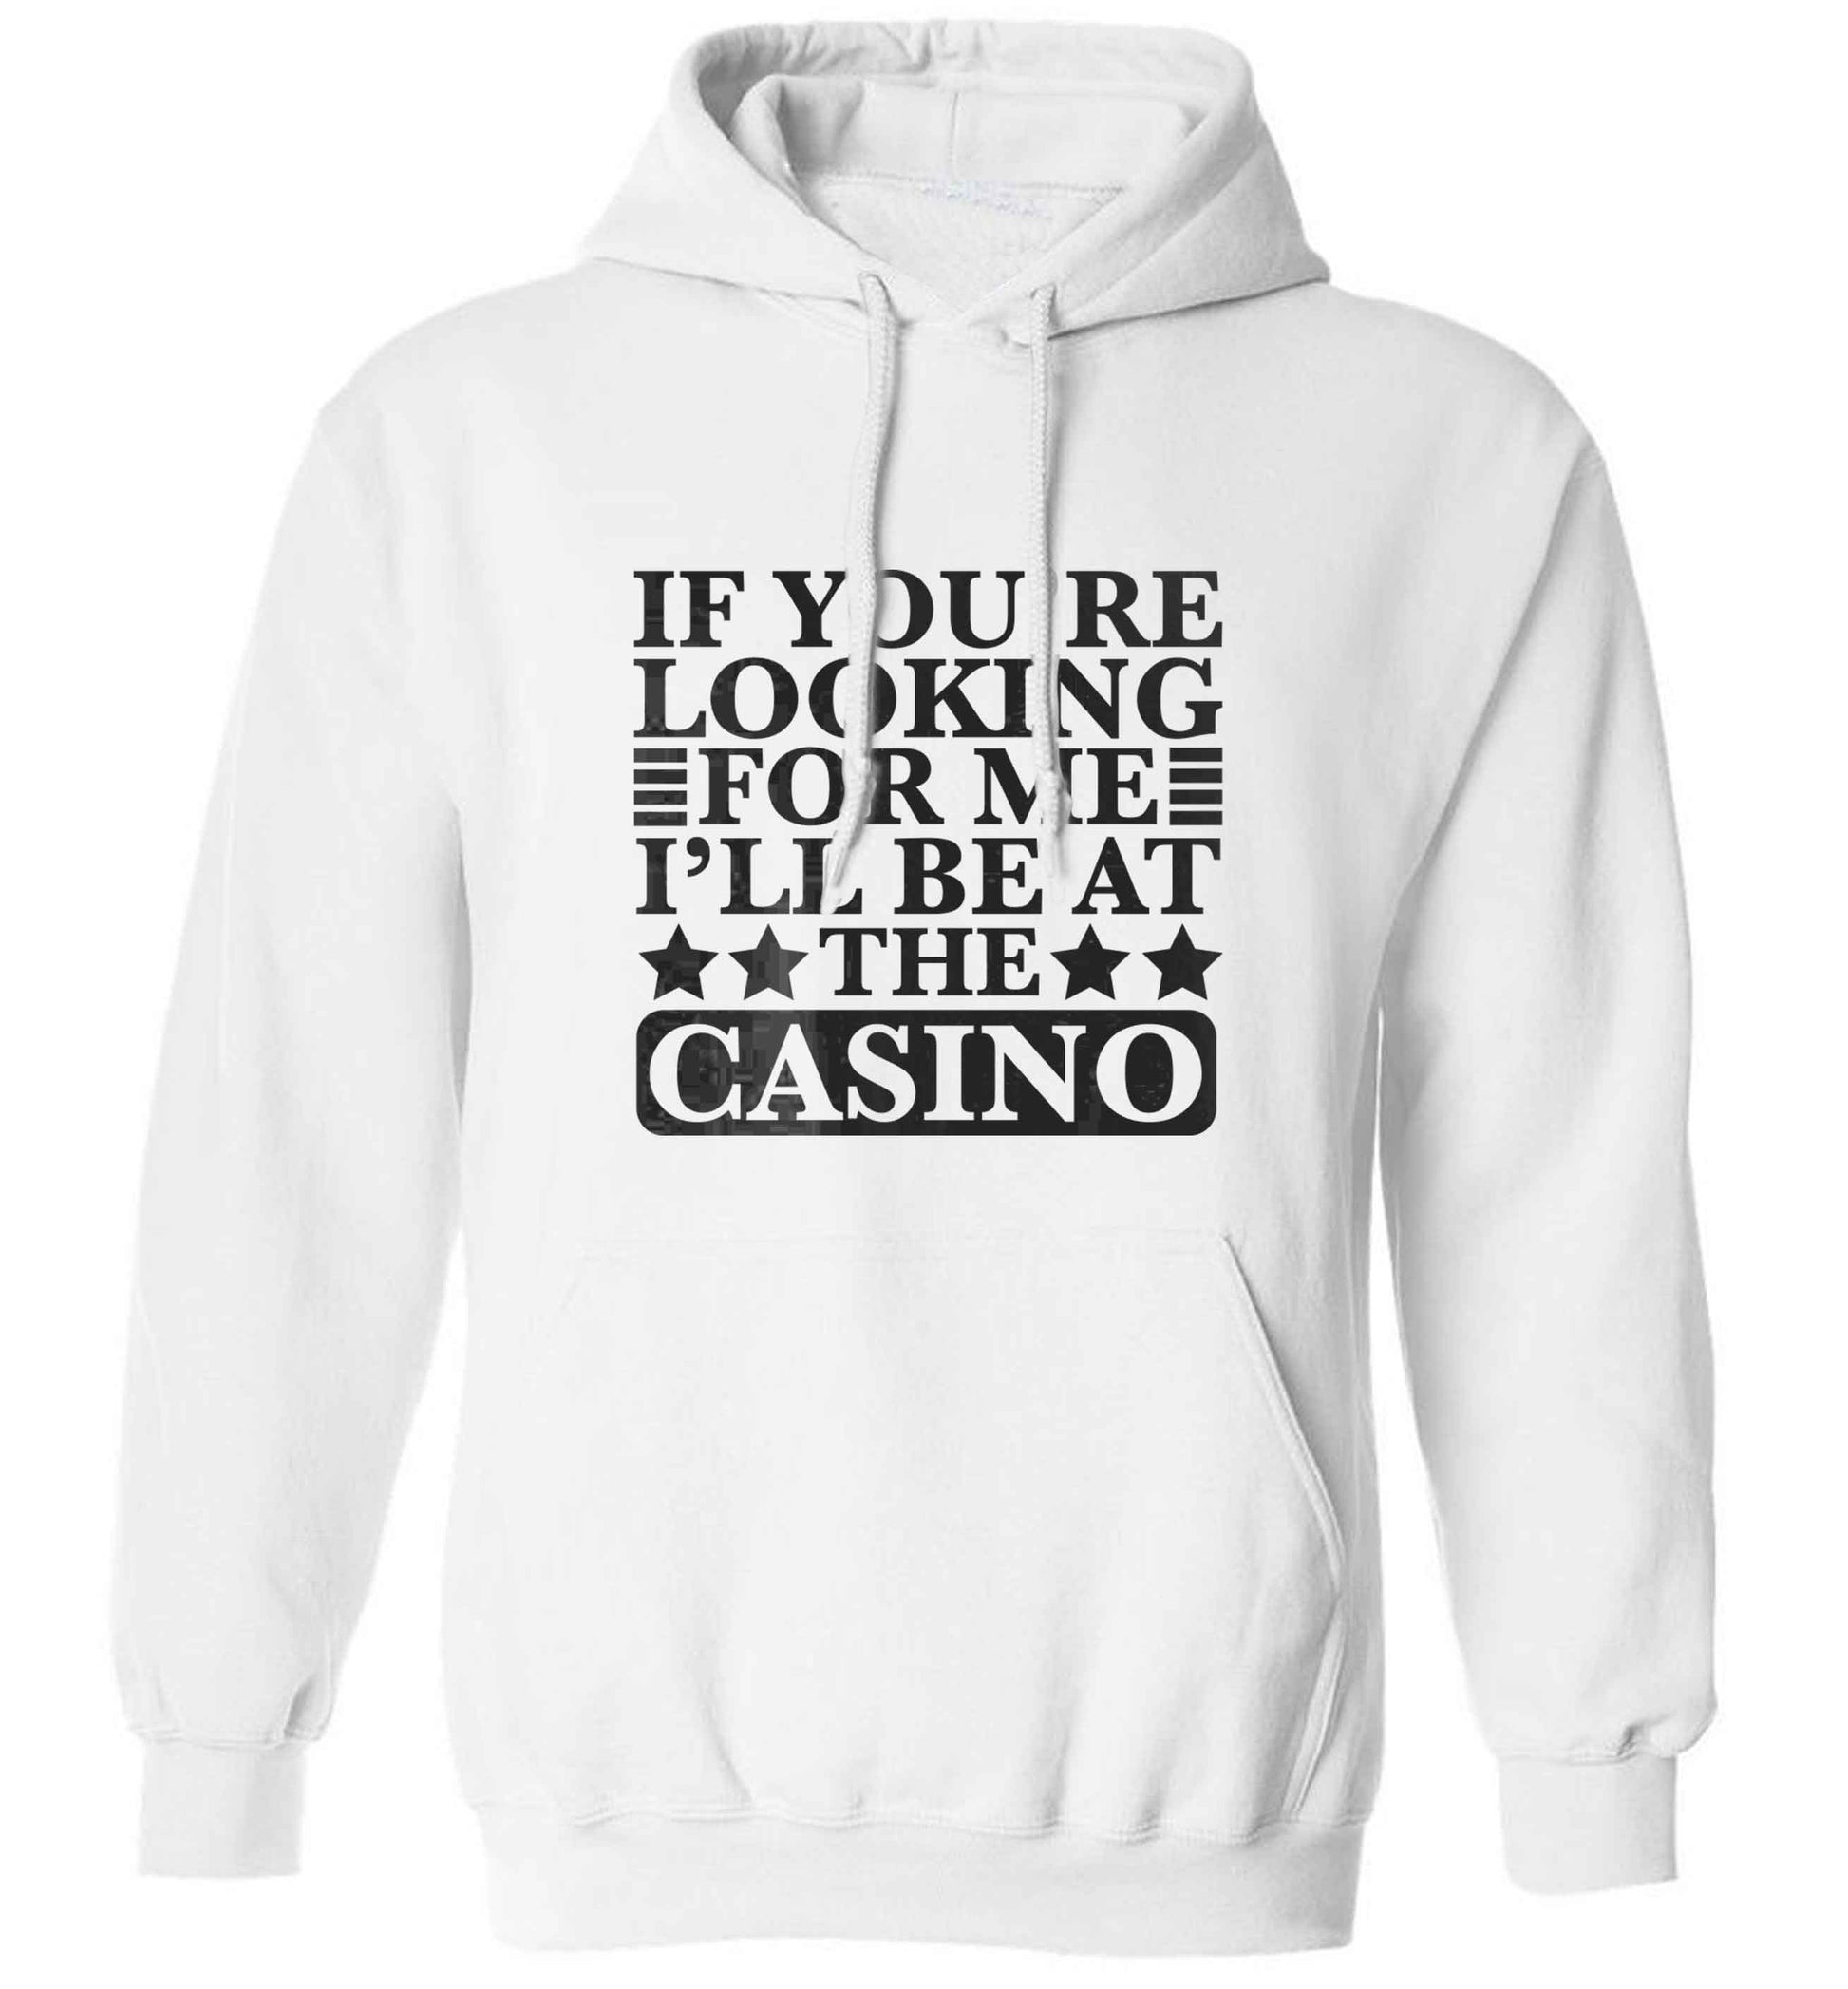 If you're looking for me I'll be at the casino adults unisex white hoodie 2XL